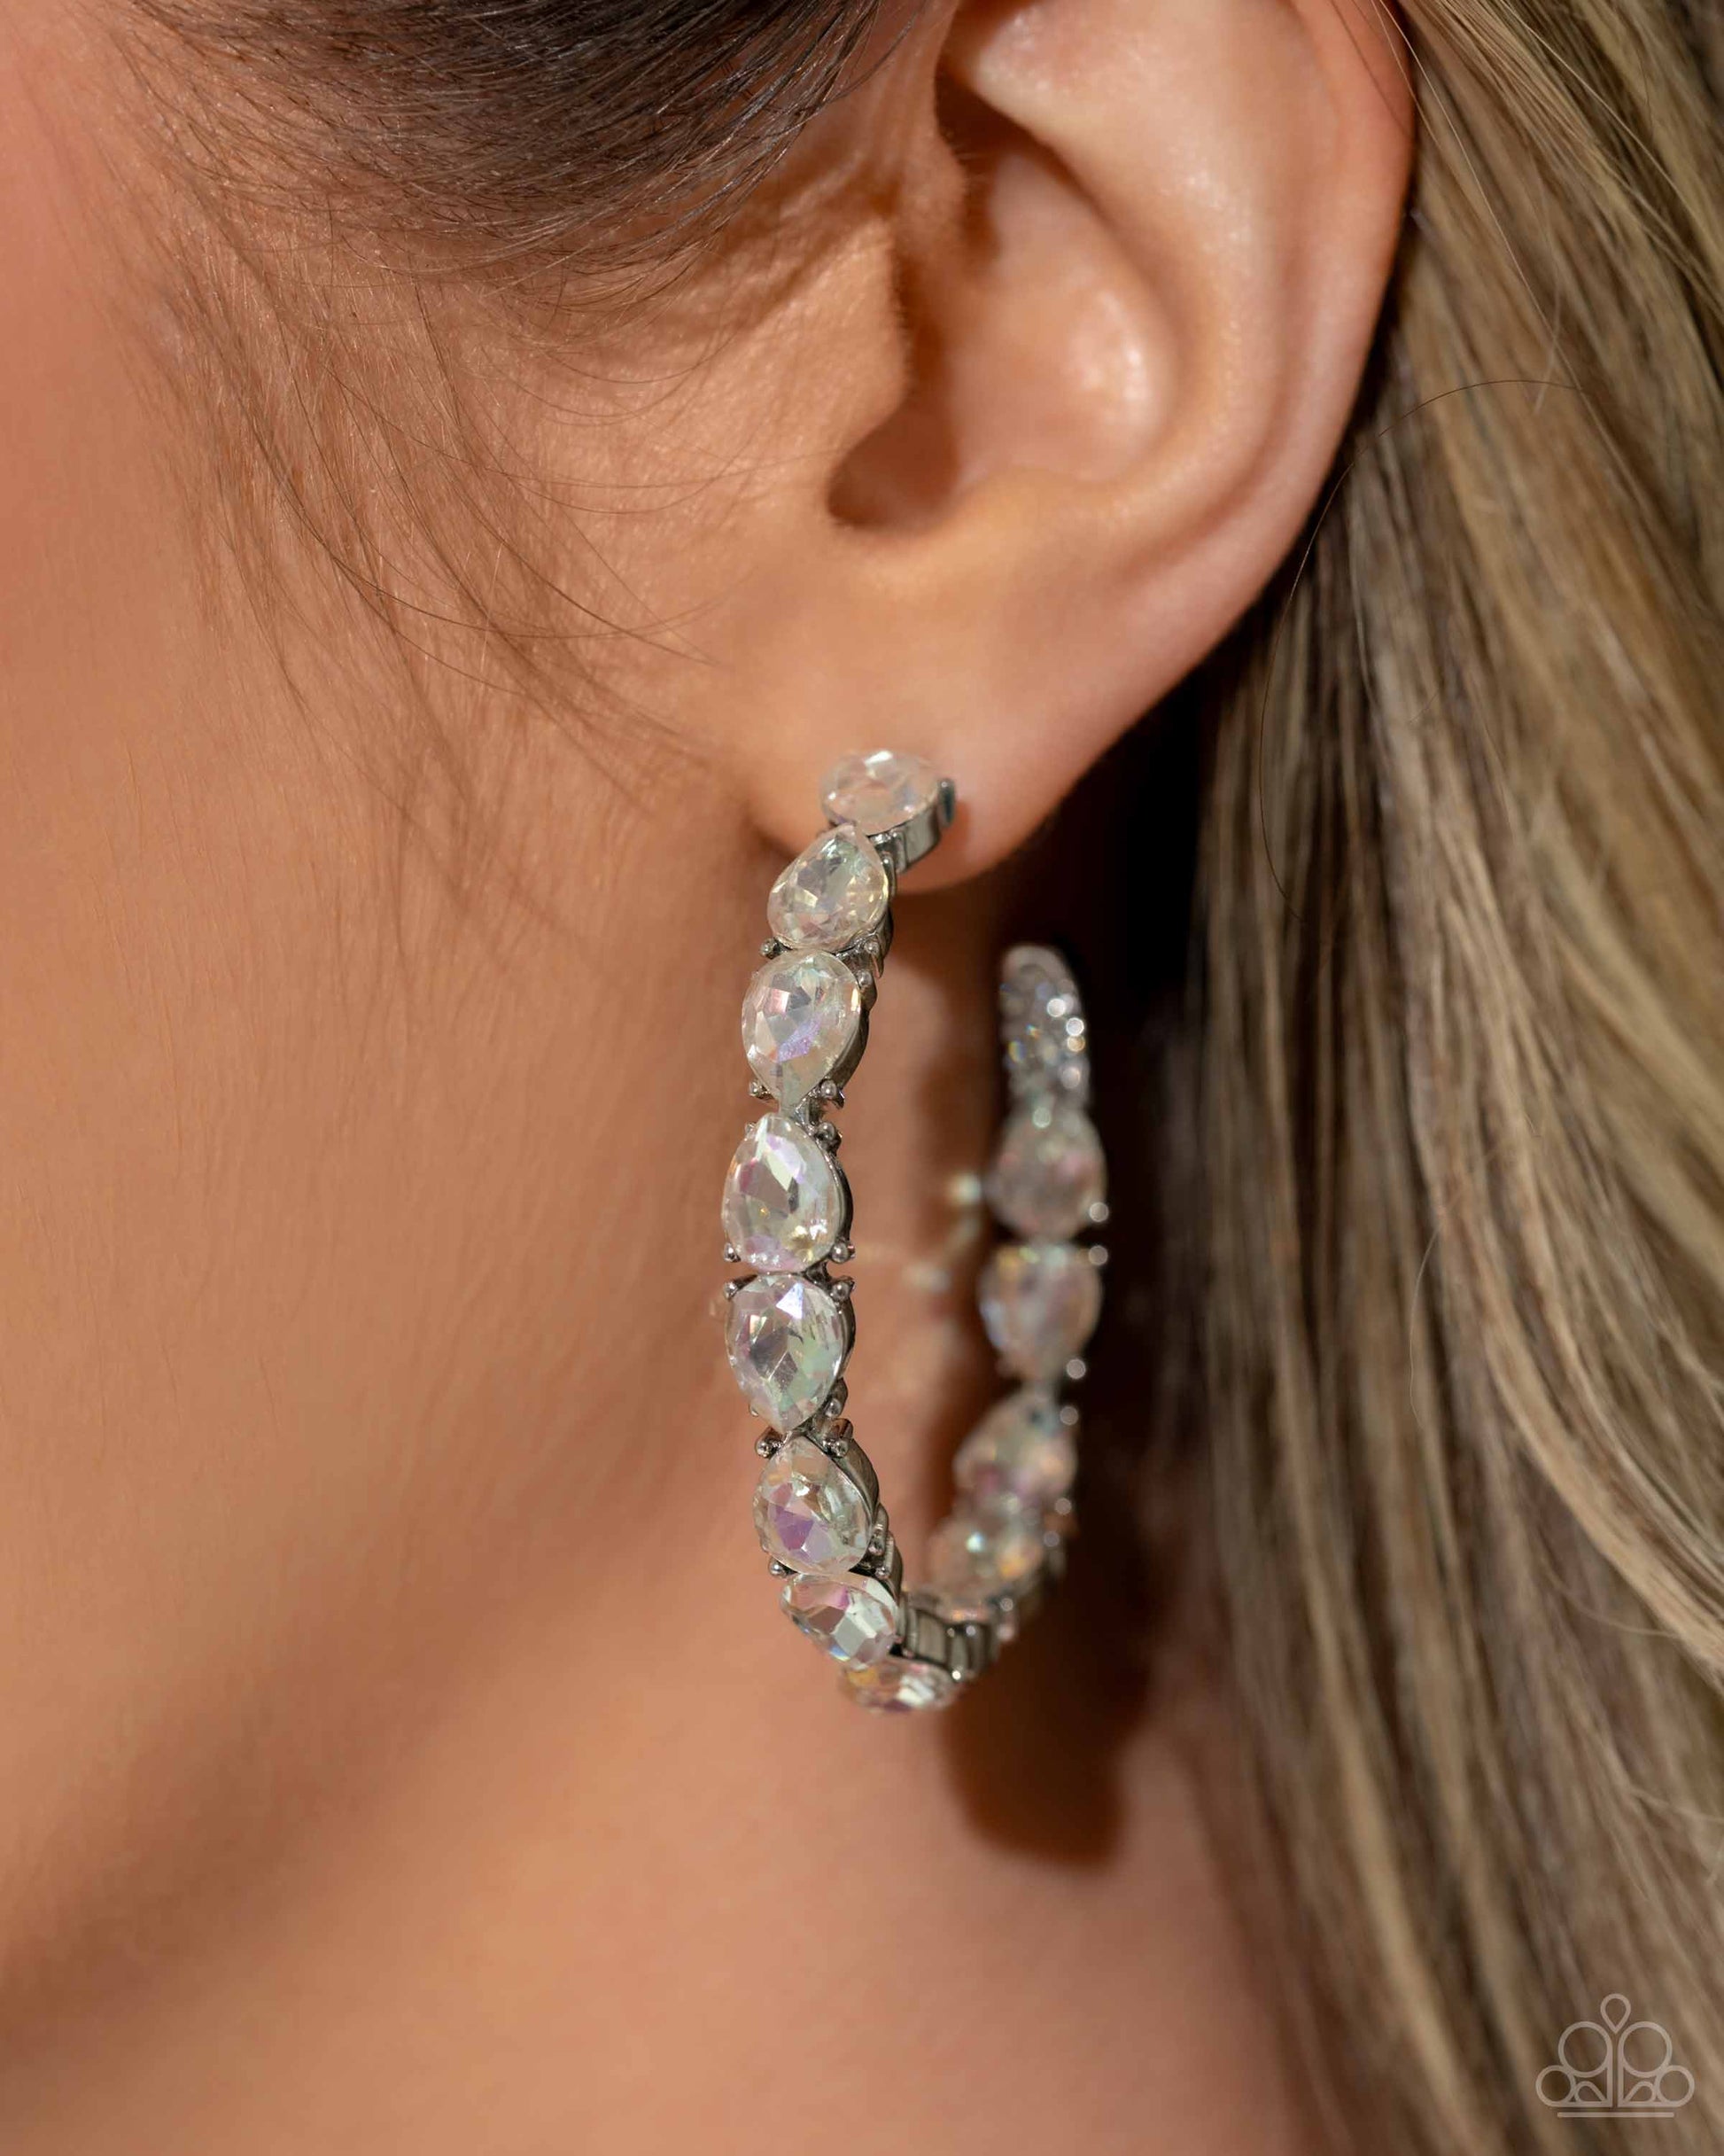 Paparazzi Presidential Pizzazz white rhinestone Earrings.Bridal hoops, affordable jewelry.Ships free